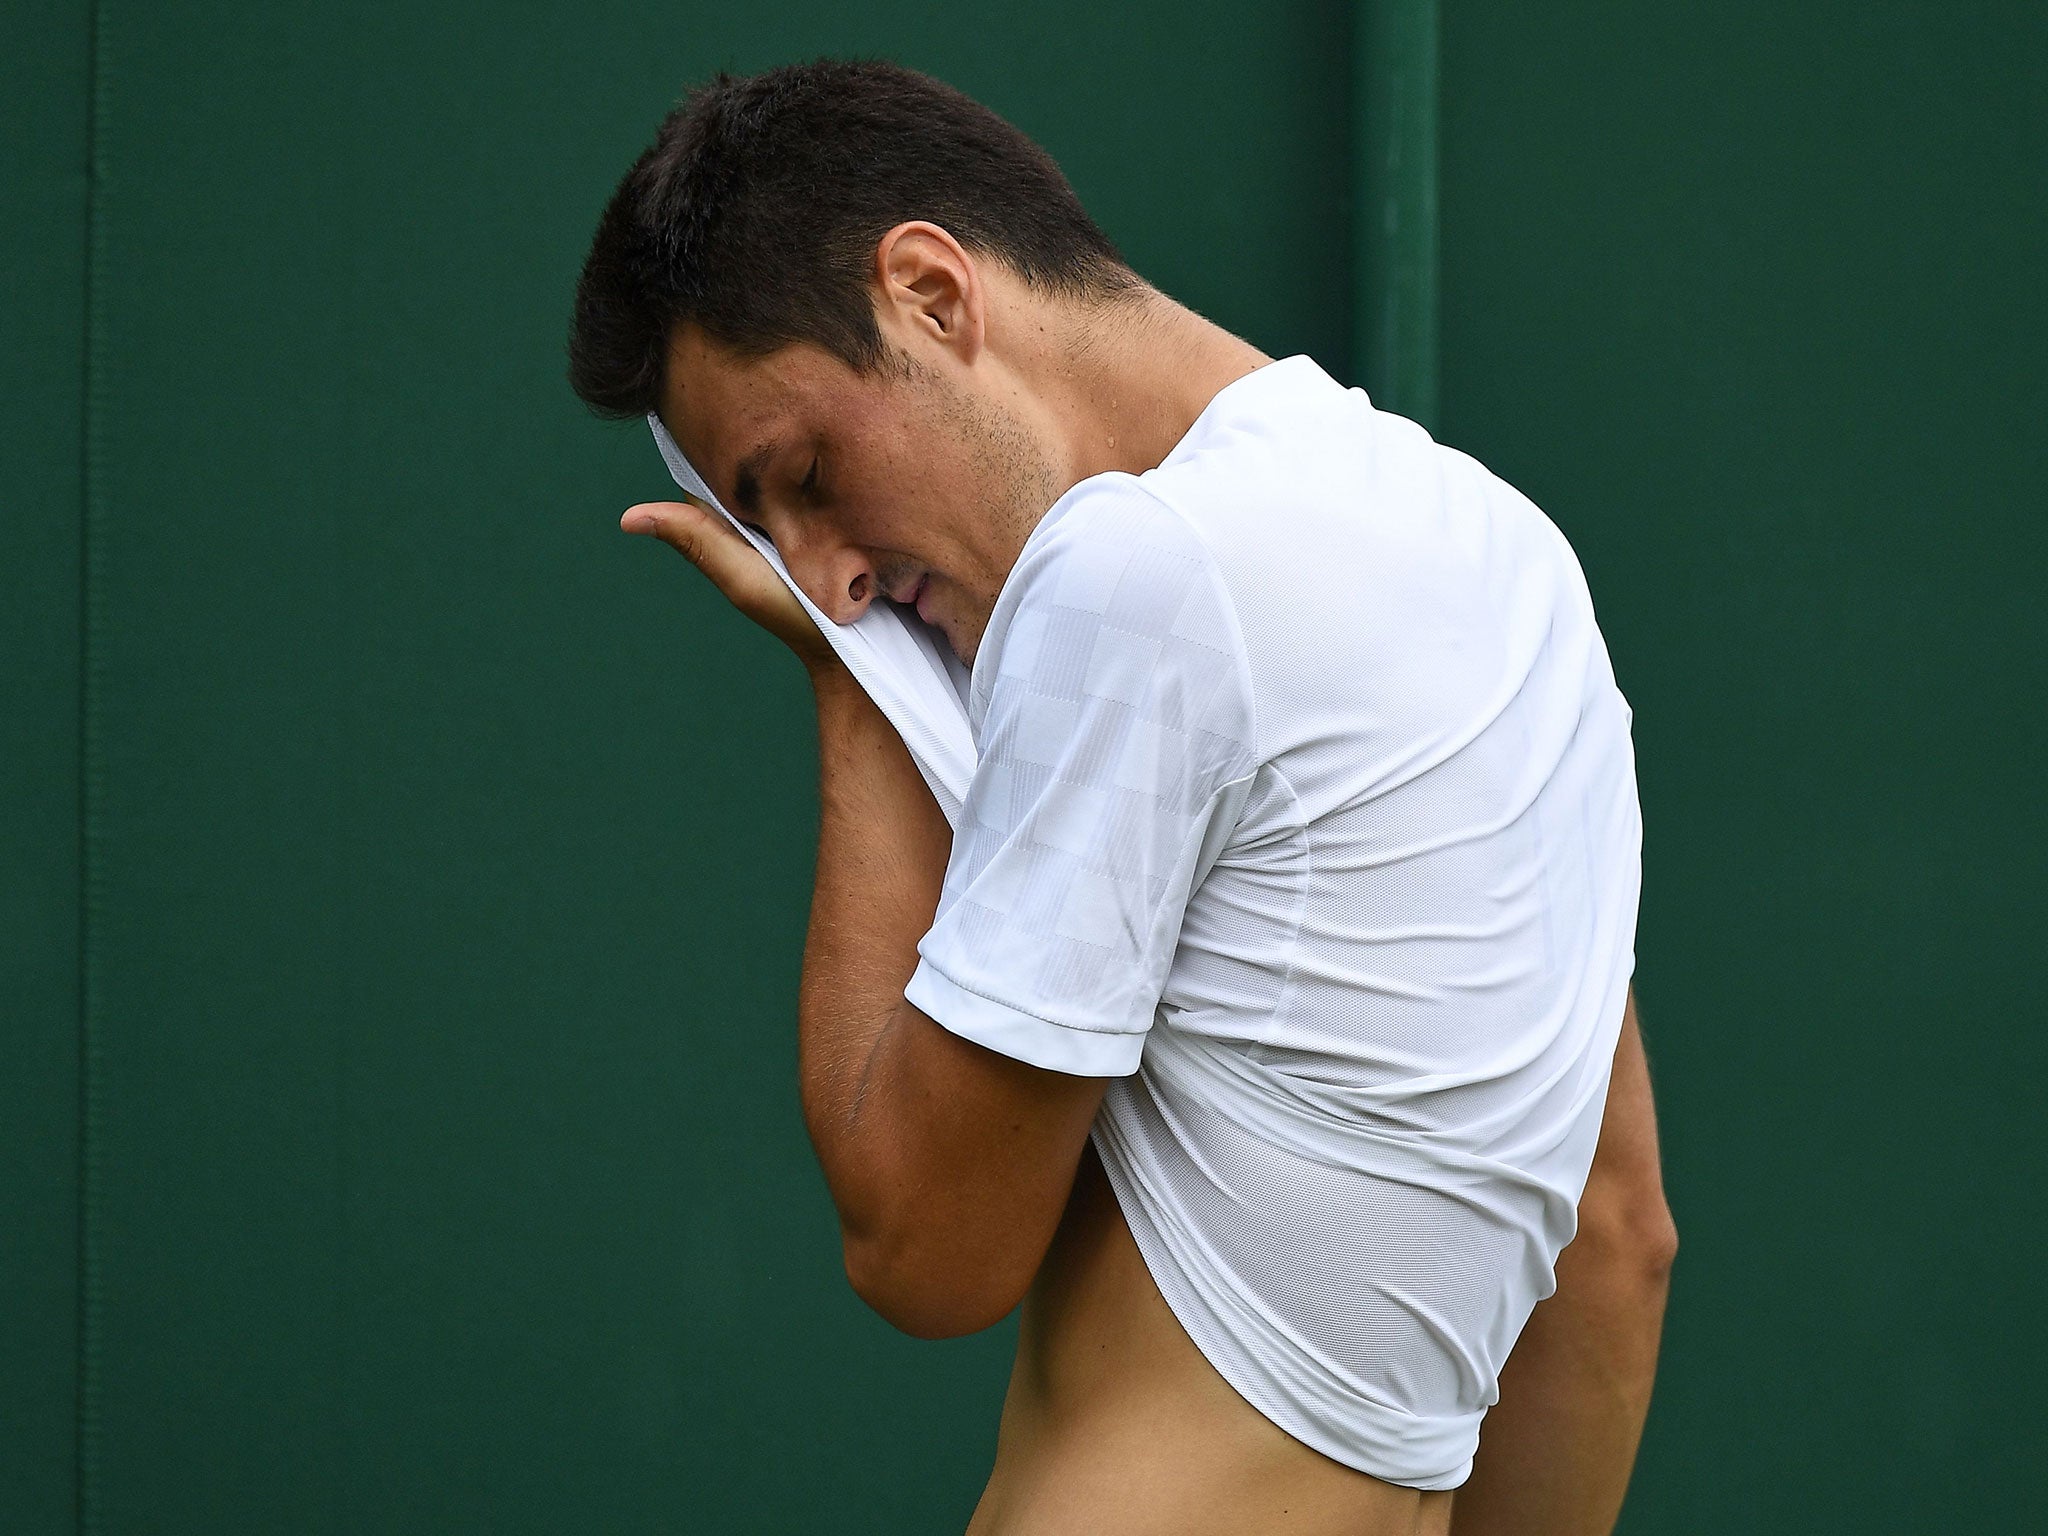 The Australian was dumped out of Wimbledon in the first round